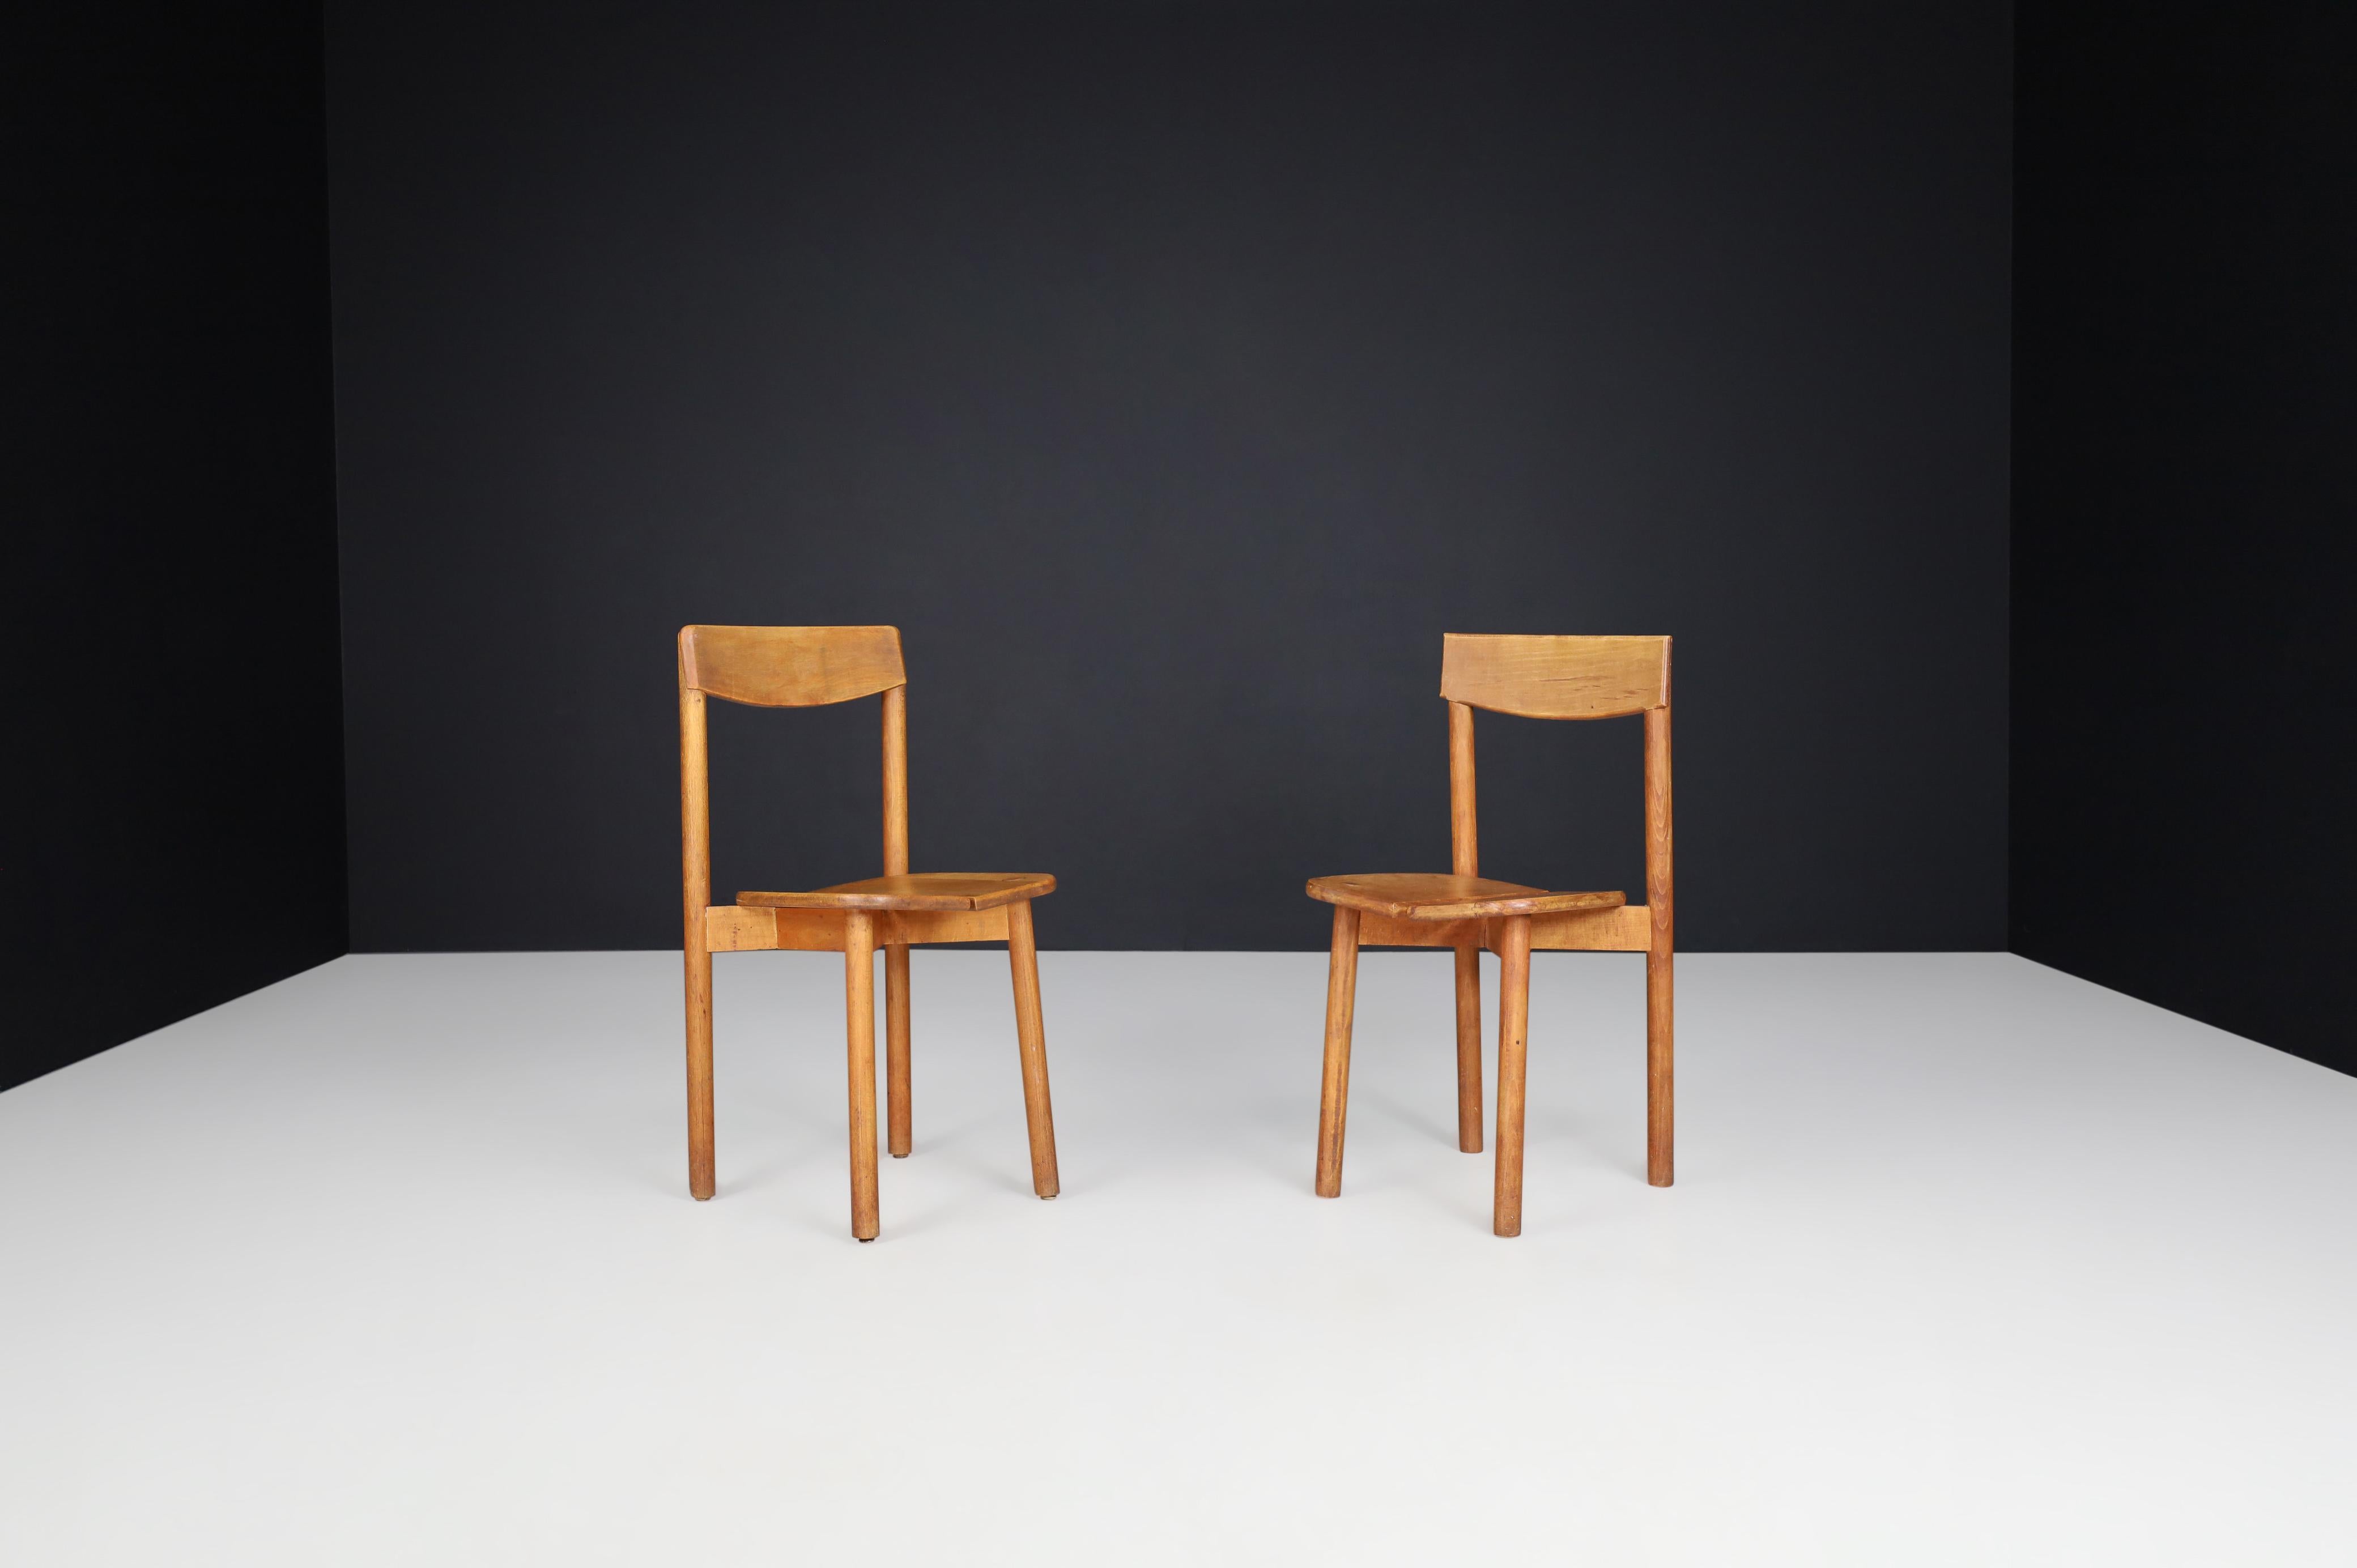 Pierre Gautier Solid Beech Chairs, France, 1960s For Sale 2